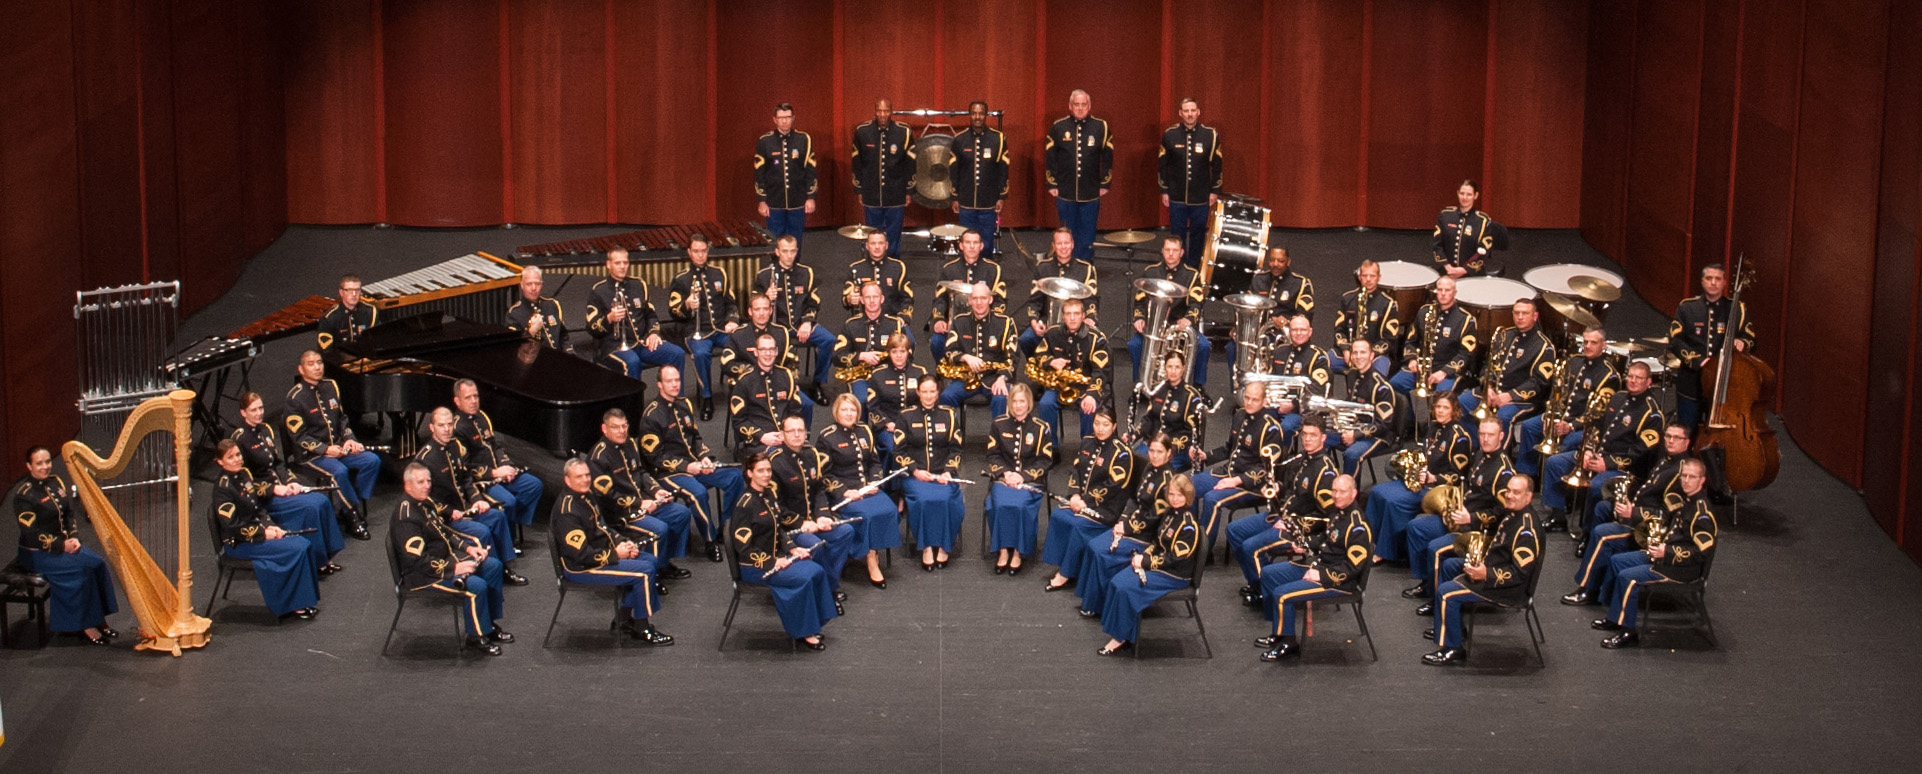 US Army Band to perform at the Opelika Center for the Performing Arts March 4